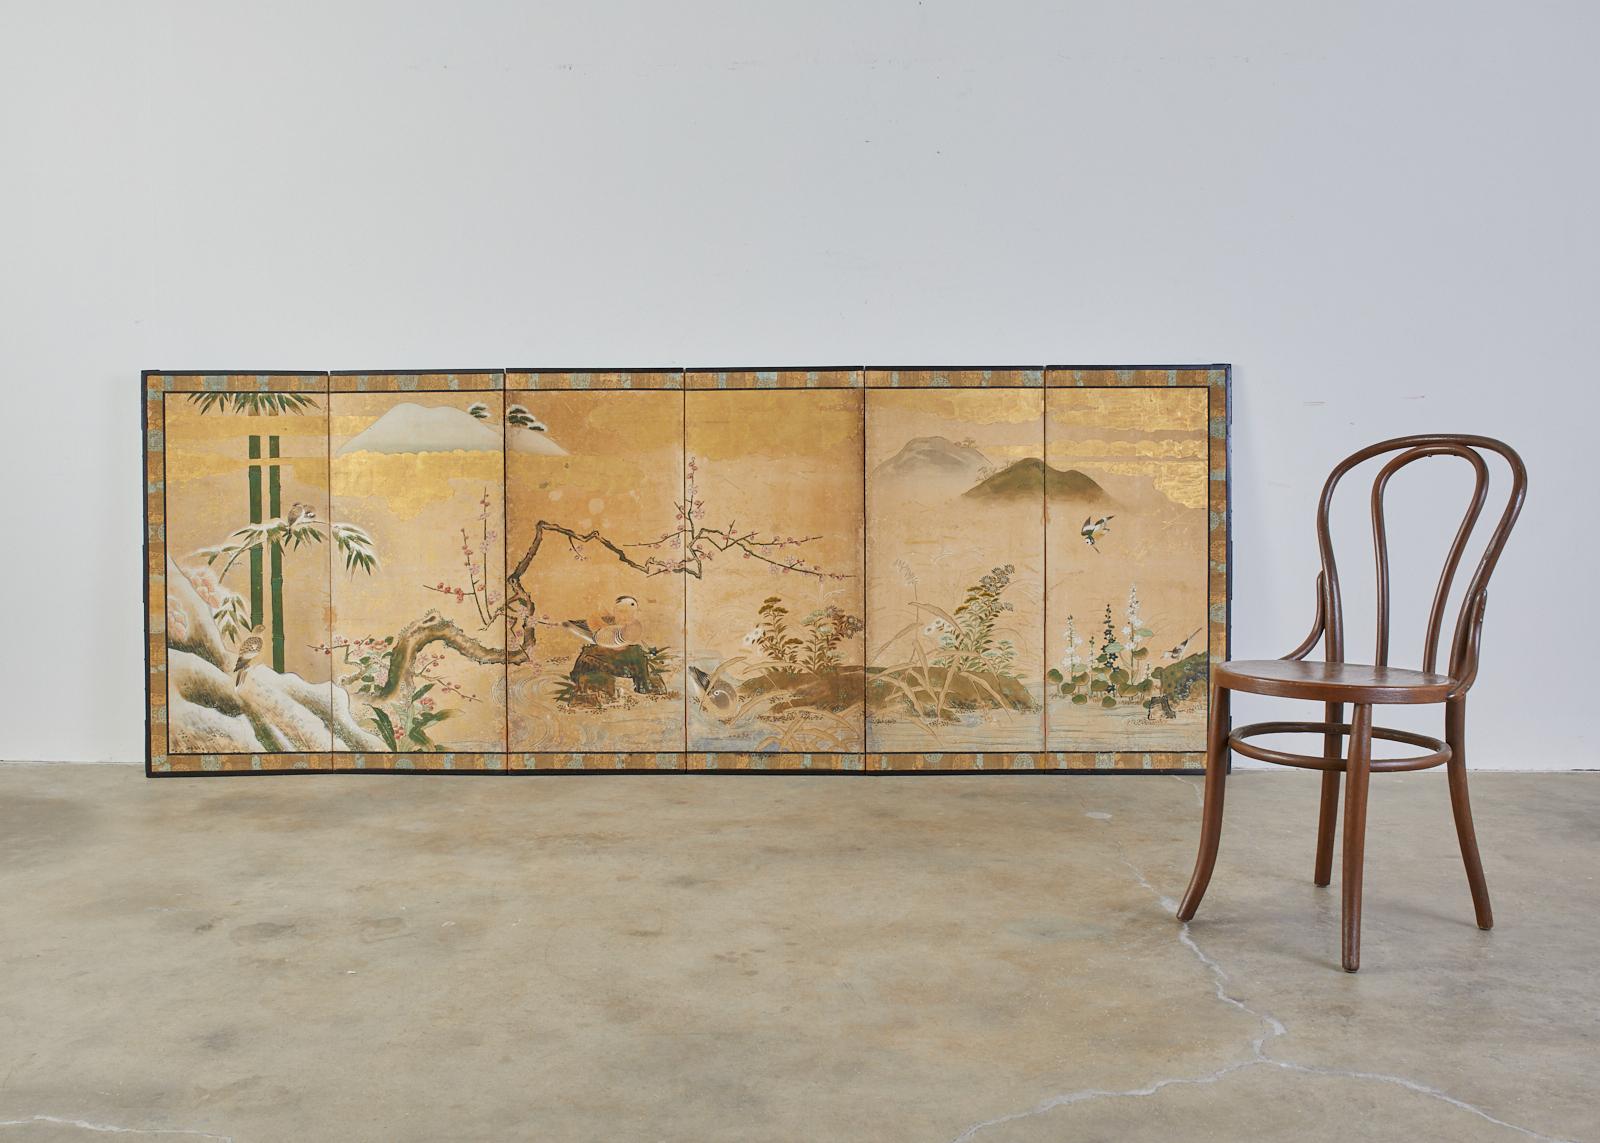 Early 18th century Japanese Edo period six-panel screen depicting a seasonal winter landscape. The idyllic scene features ducks and birds with flowers of fall and winter by water’s edge. Beautifully crafted with ink and natural color pigments on